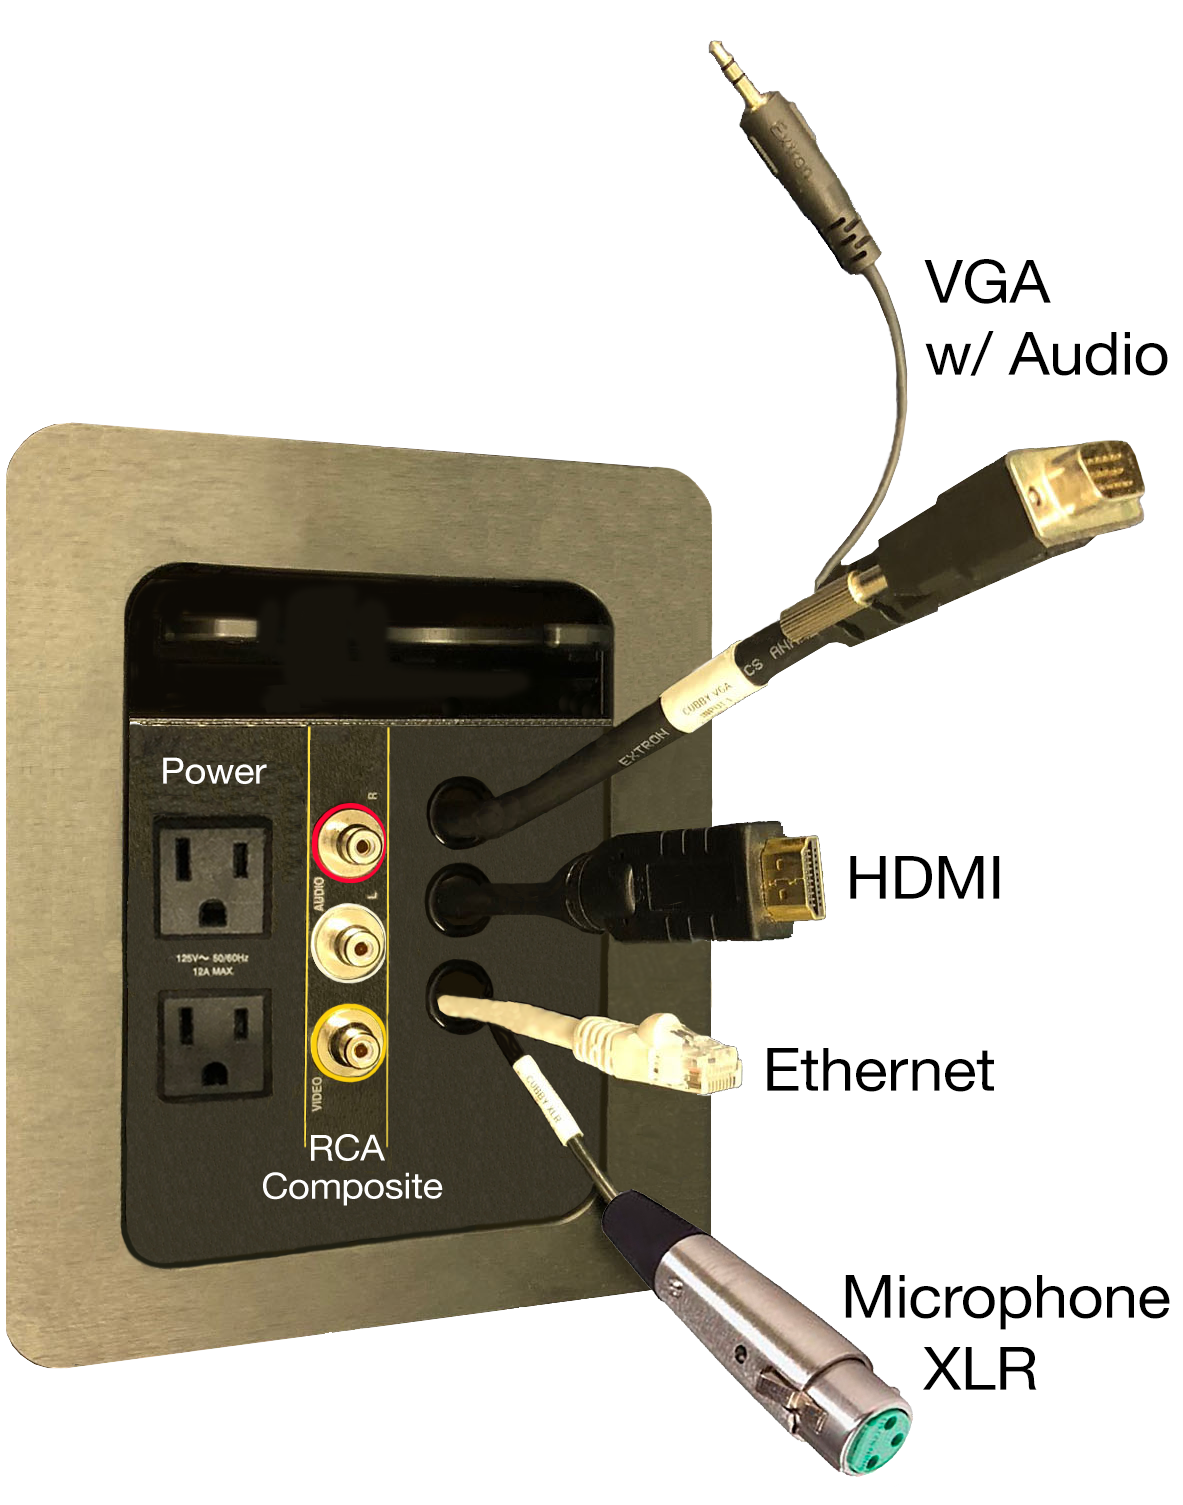 Image of HD panel open and showing power outlets, RCA Composite inputs, VGA cable with audio, HDMI cable, Ethernet cable, and Microphone XLR cable